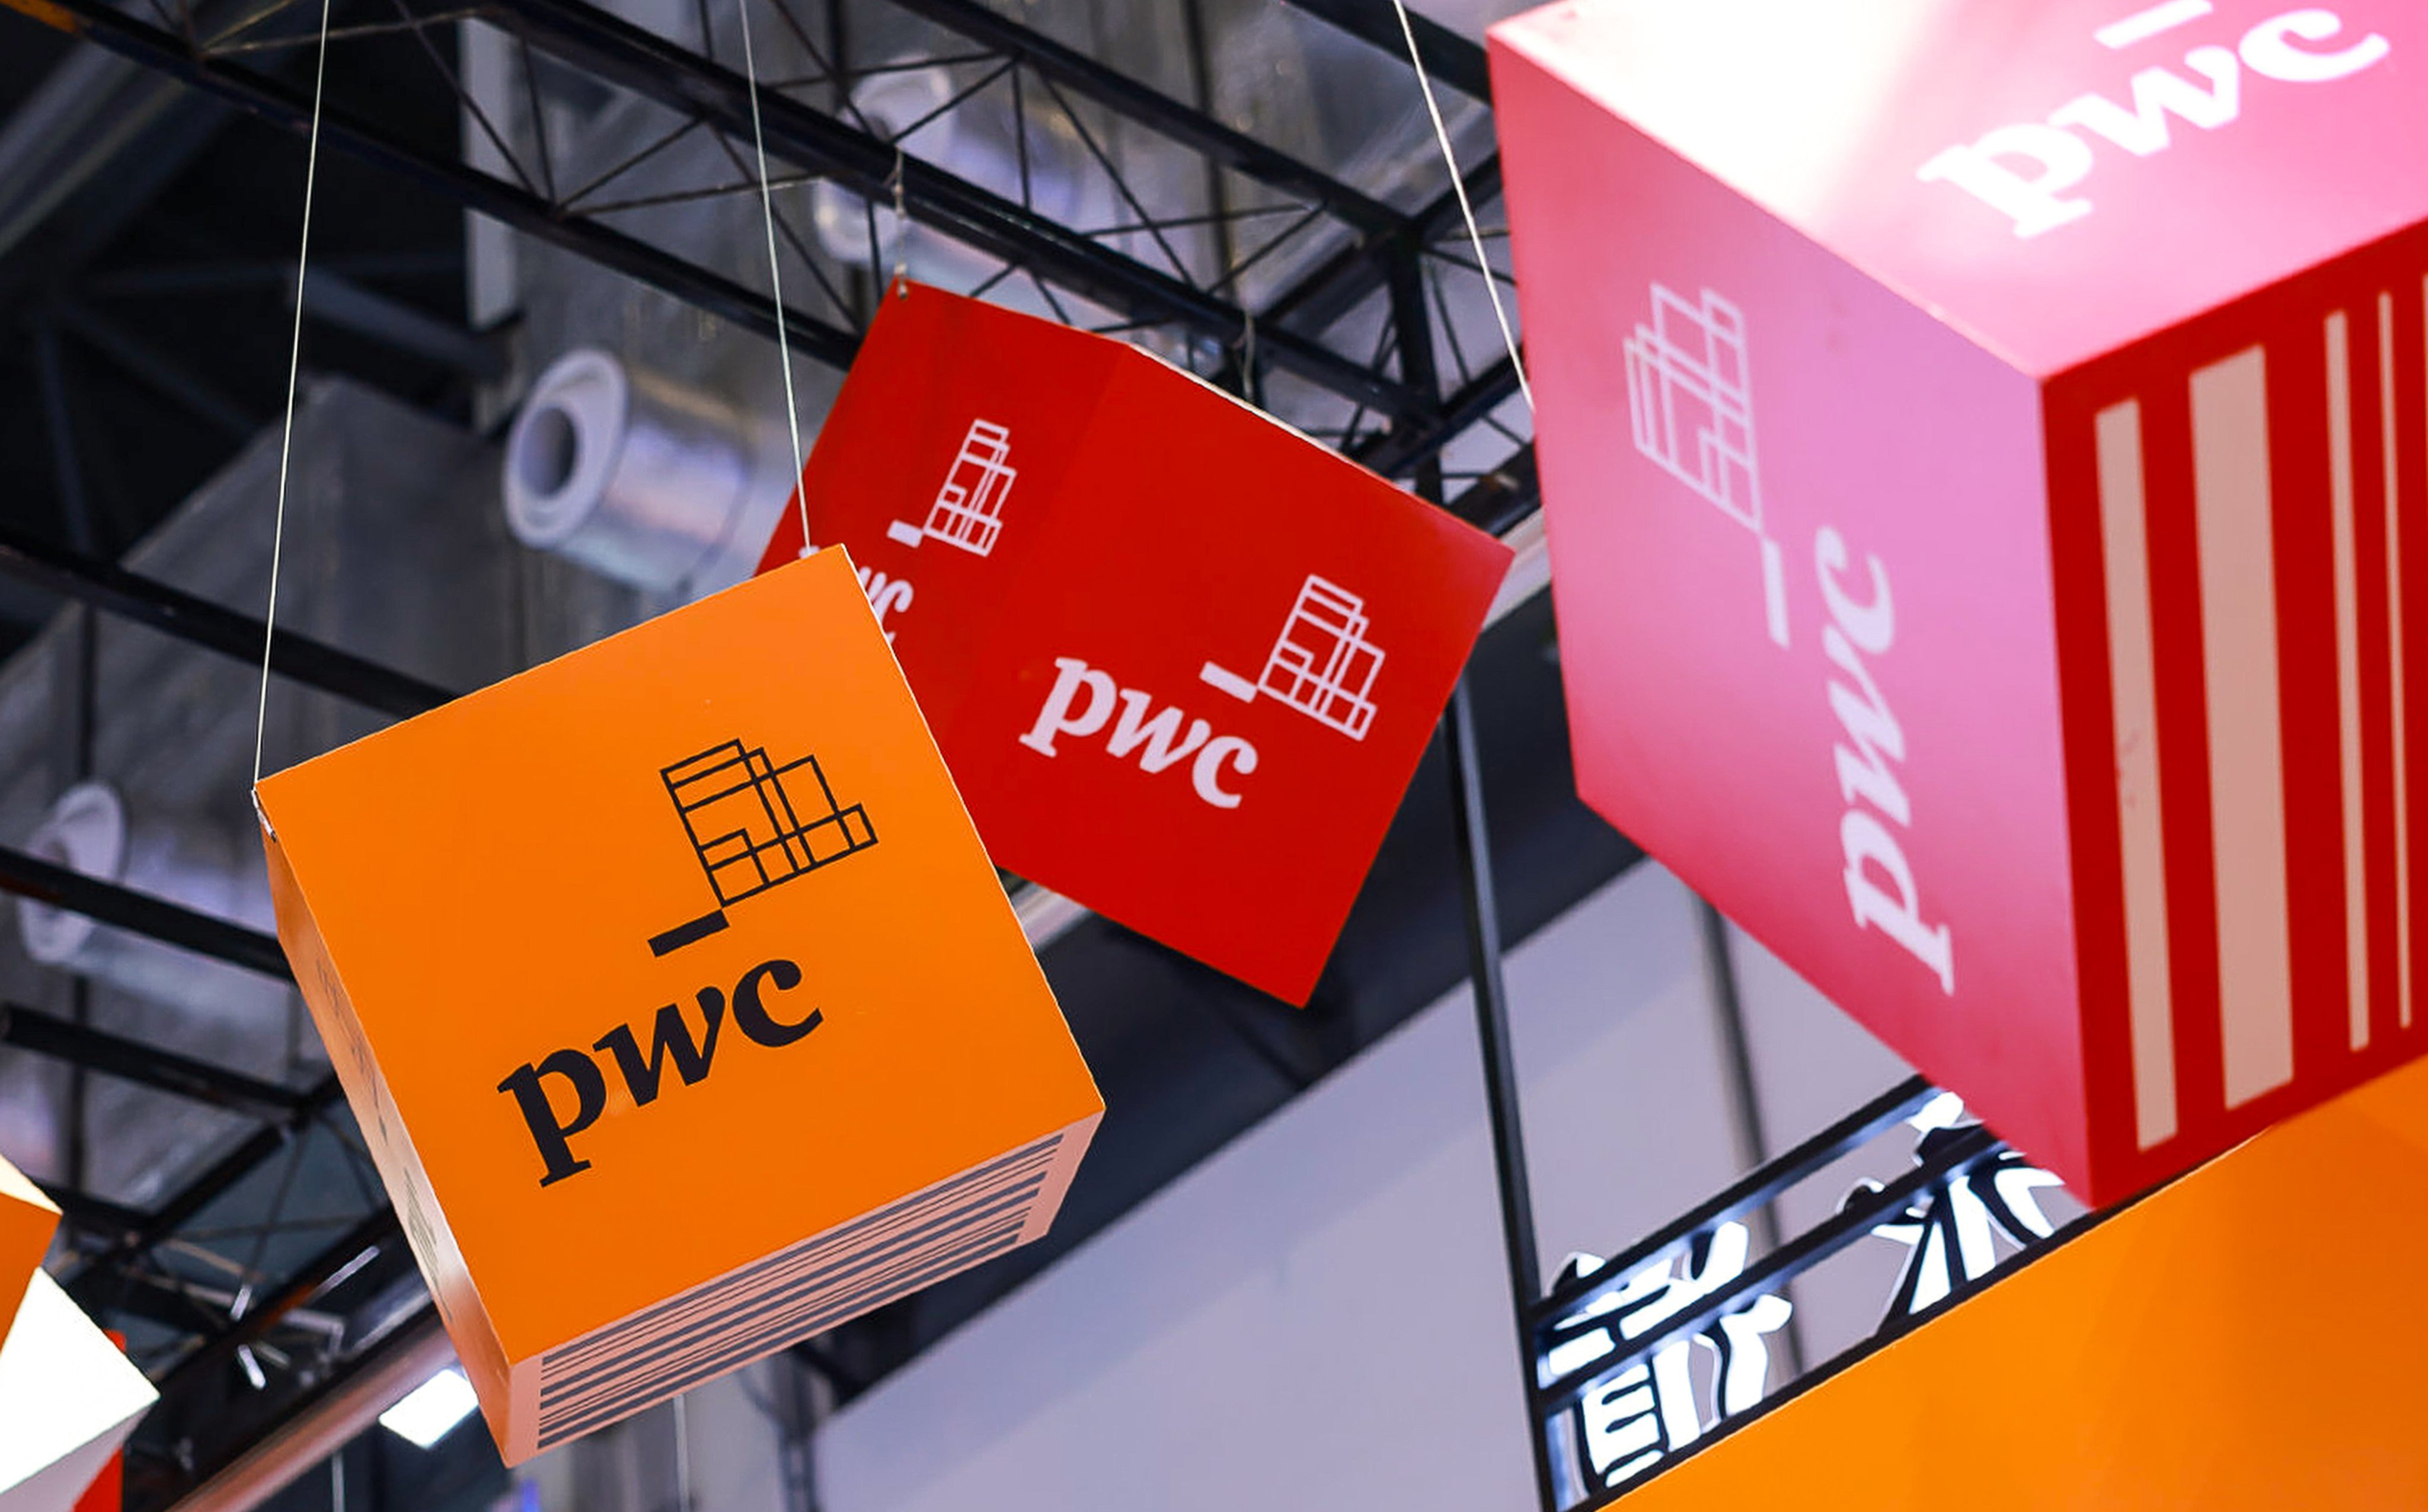 PwC has found itself in trouble over its role as Evergrande’s auditor. Photo: Weibo